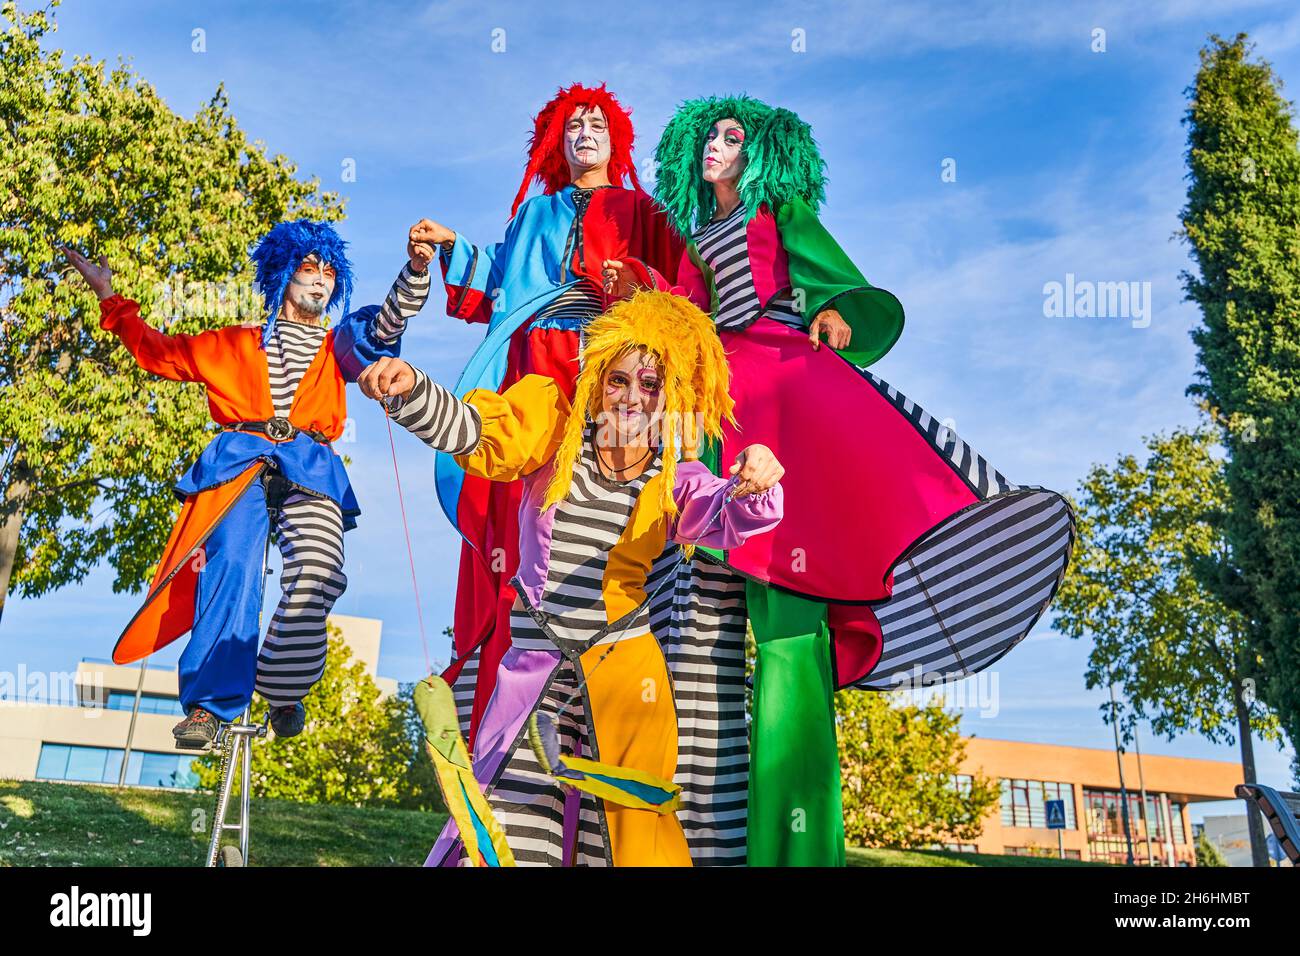 Low angle of cheerful male and female clowns in colorful costumes and wigs, smiling while performing show on stilts and unicycle during festival in city park Stock Photo